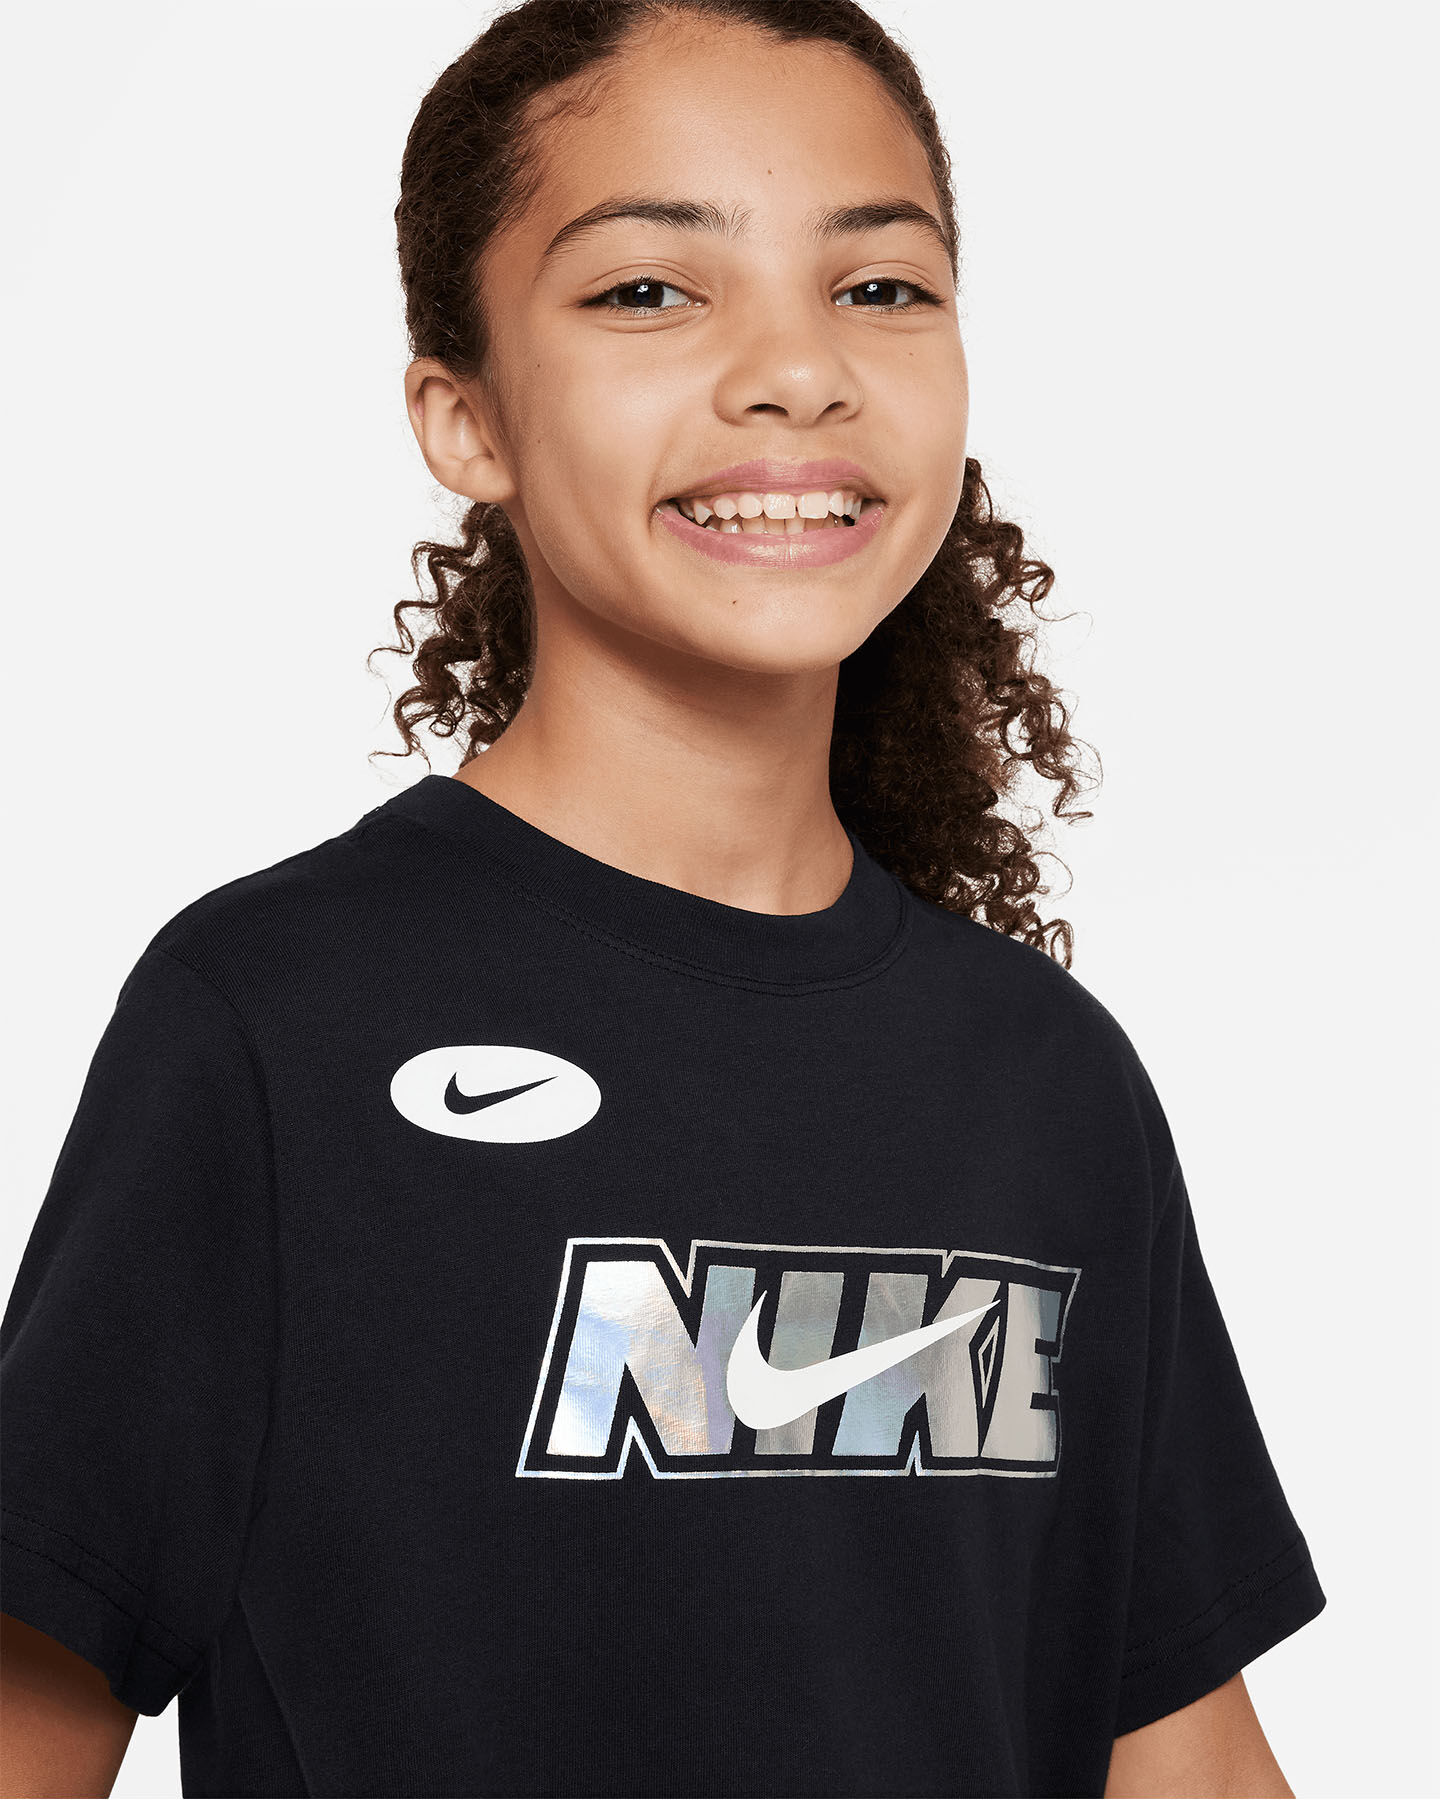  T-Shirt NIKE IRIDESCENT JR S5495263|010|S scatto 5